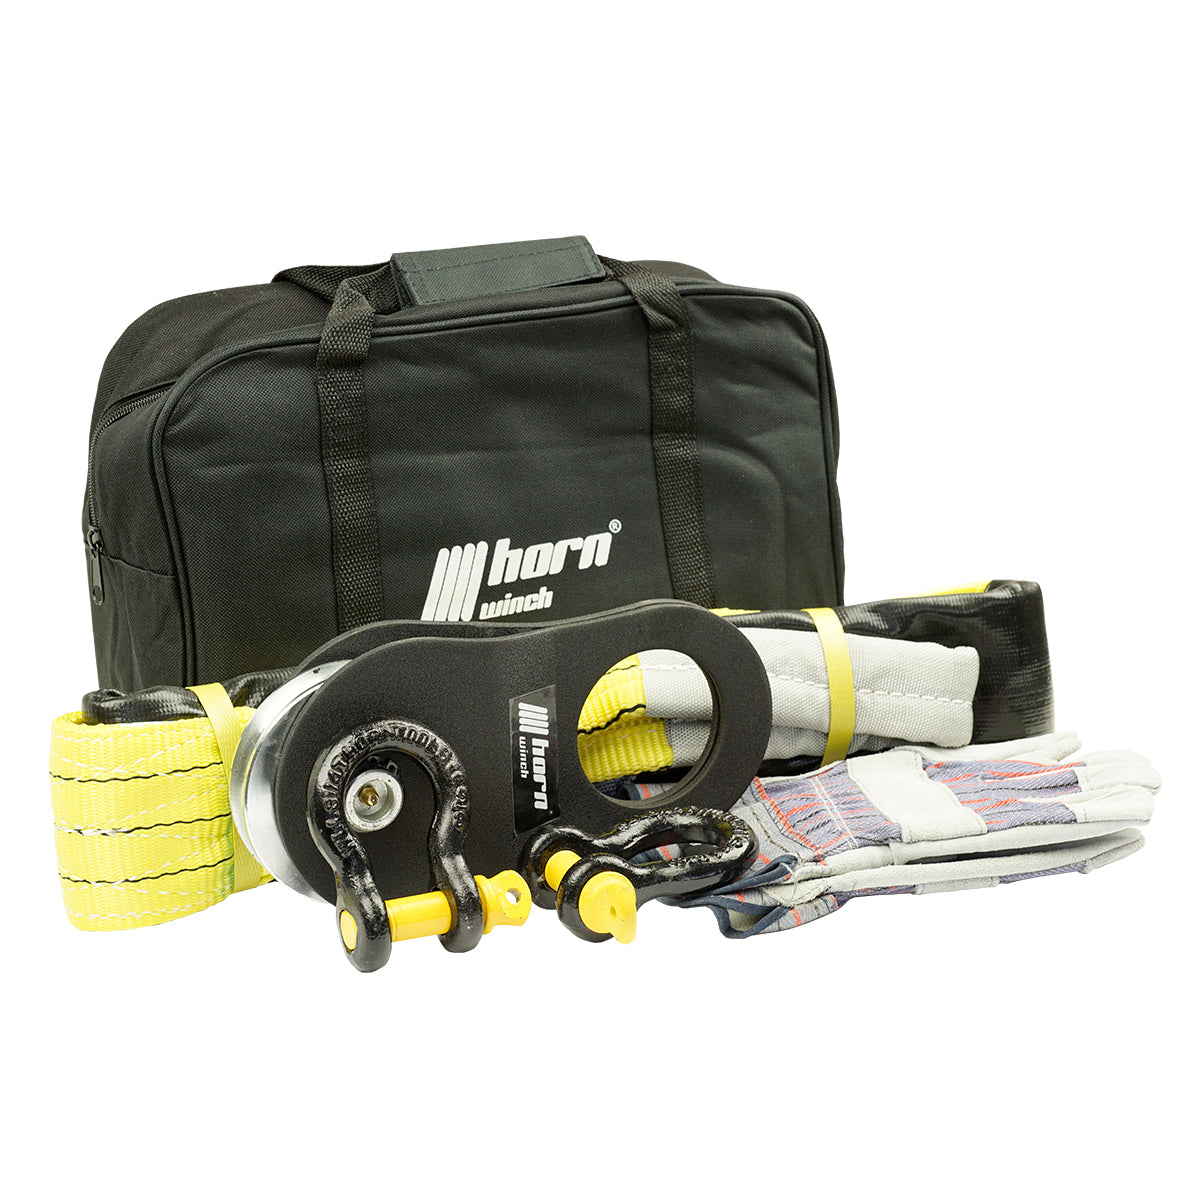 Horntools winch accessory kit with bag